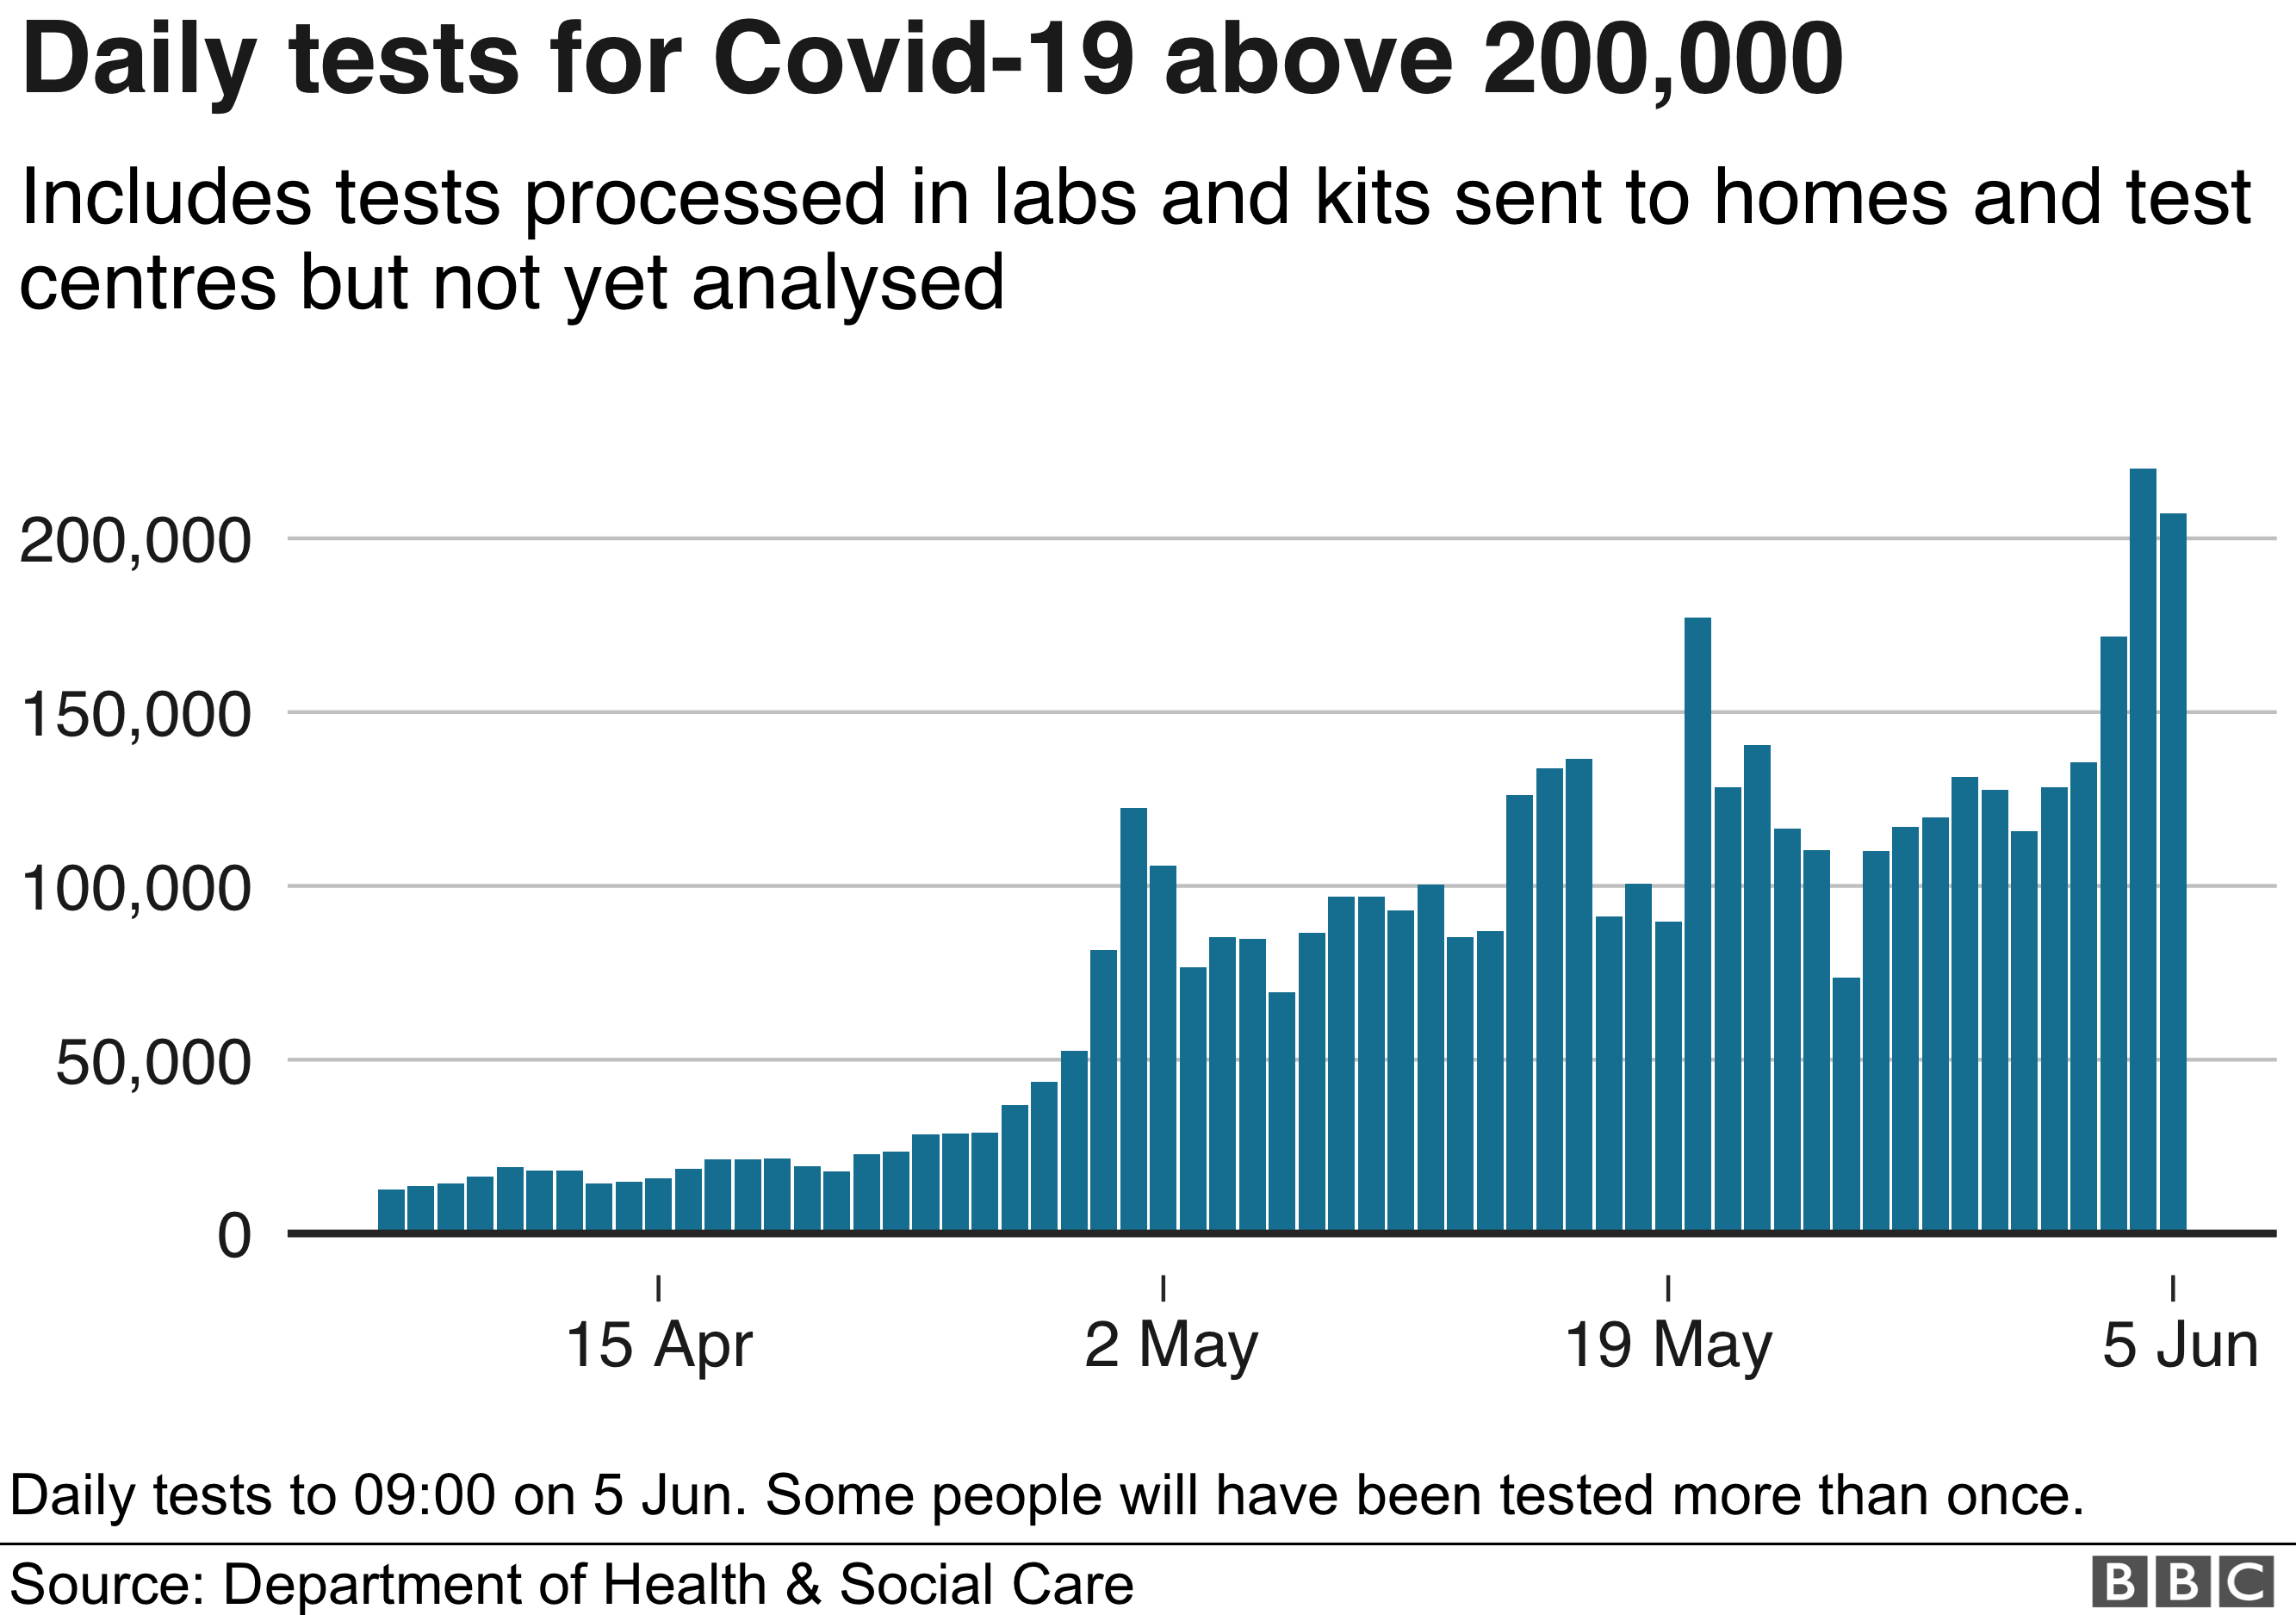 Chart showing daily tests running at over 200,000, 5 June